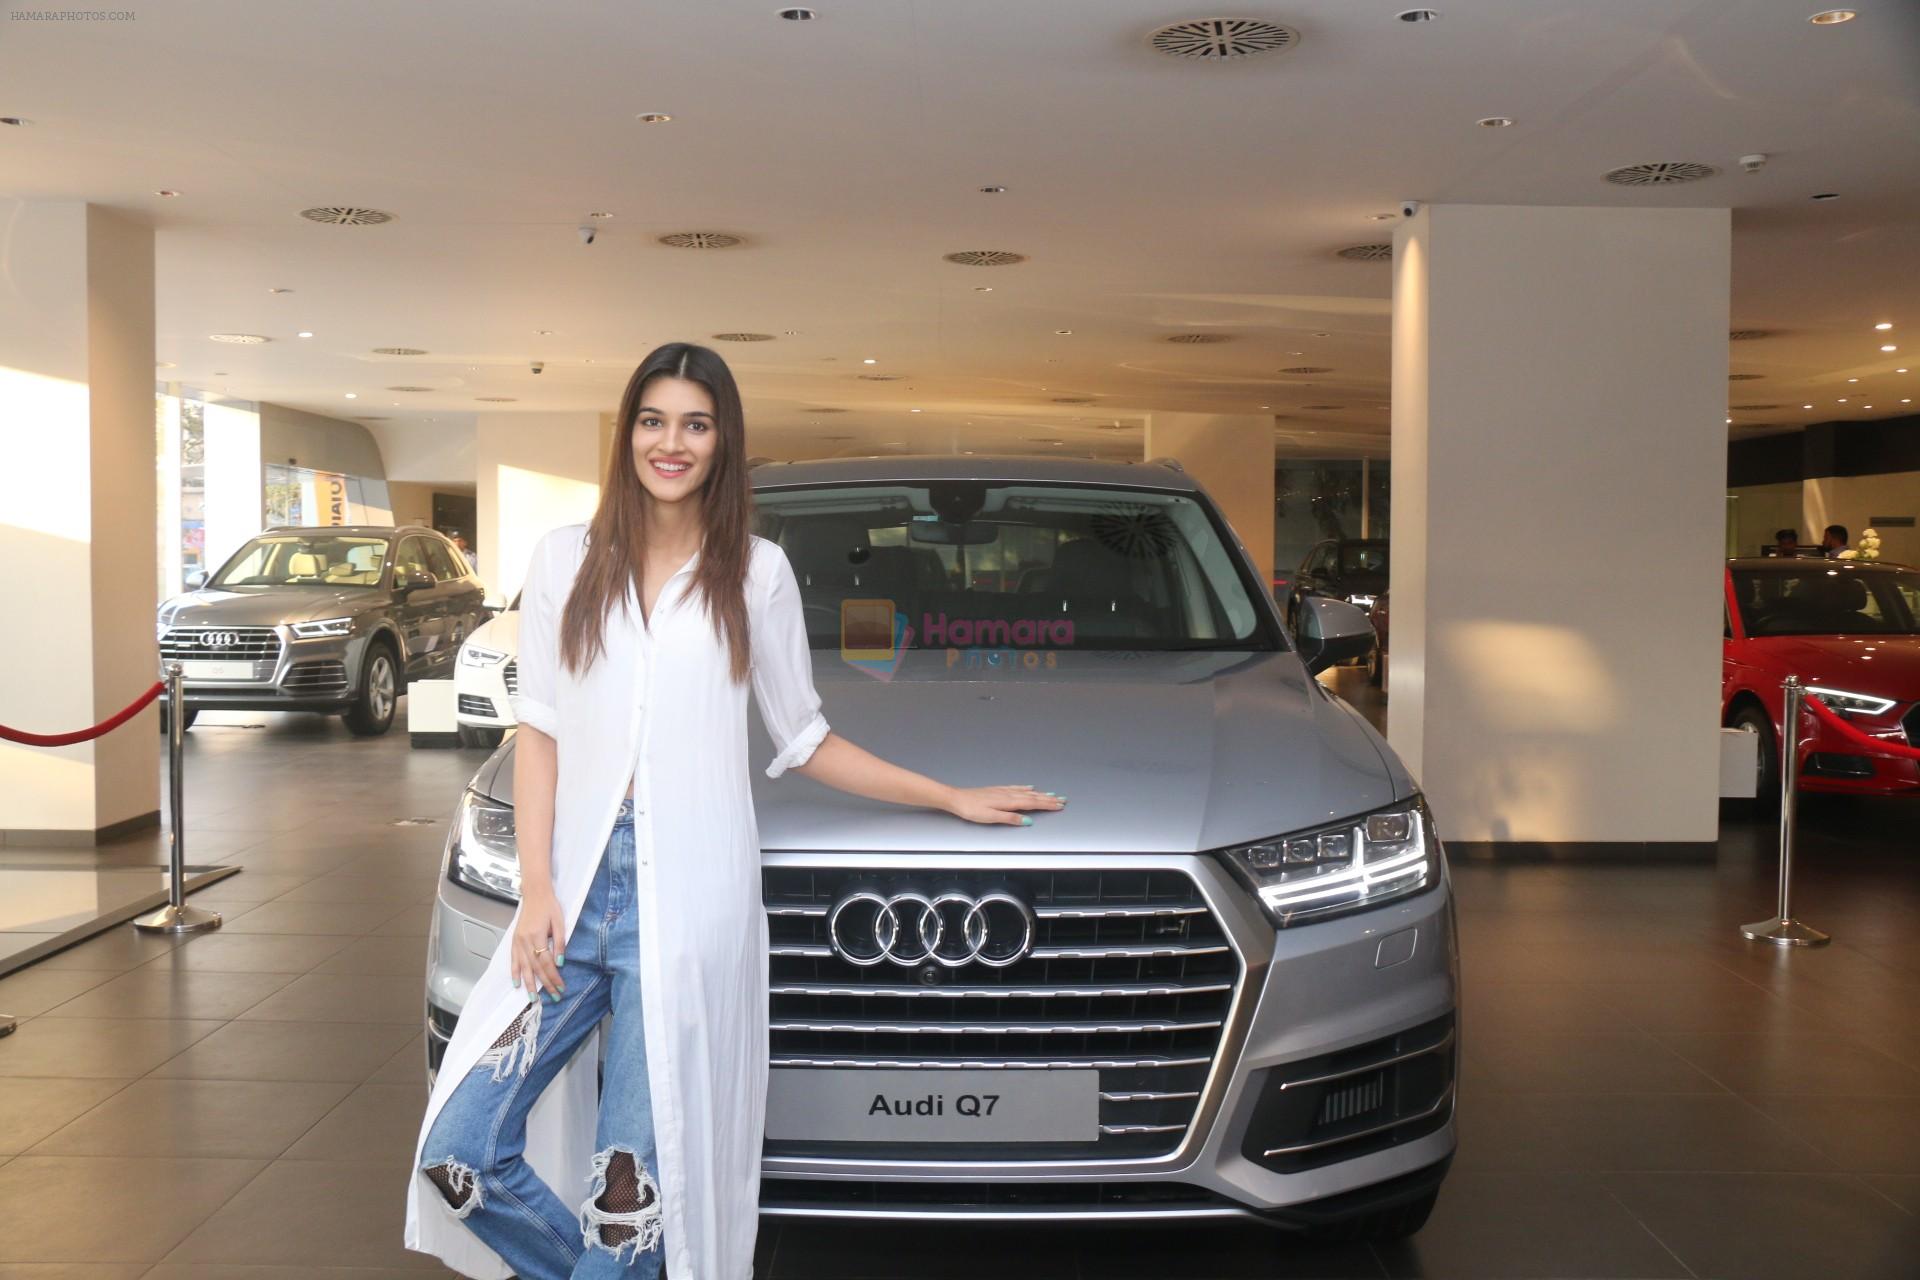 Kriti Sanon Taking The Delivery Of The Audi Q7 on 25th Jan 2018